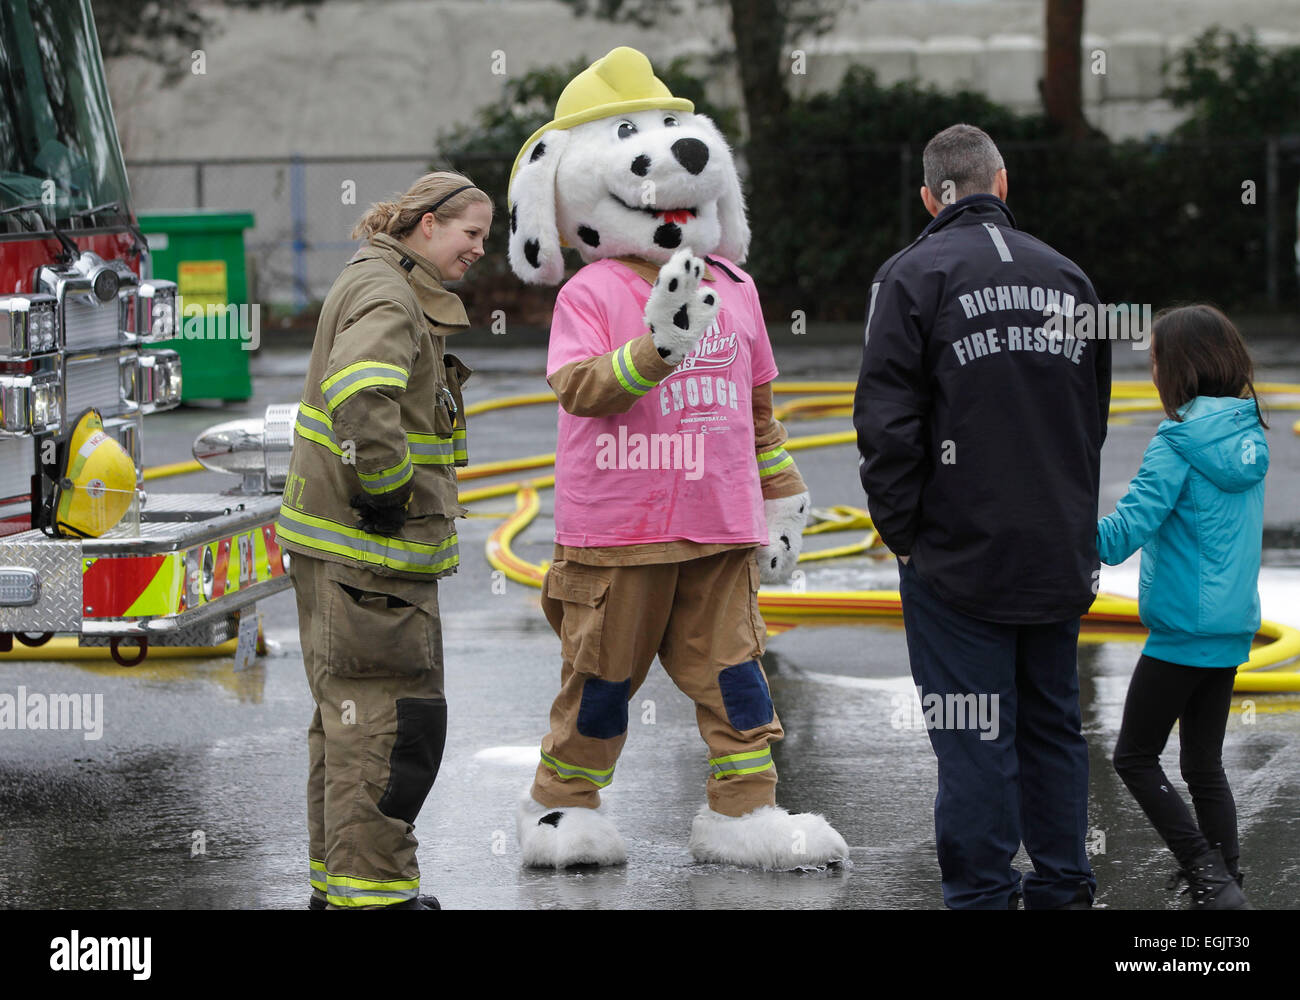 Richmond, Canada. 25th Feb, 2015. A mascot of fire hall wearing pink shirt to support anti-bullying greets a schoolgirl at a fire hall in Richmond, Canada, Feb. 25, 2015. People from different organizations and schools across Canada wear pink shirts on the annual Pink Shirt Day to raise awareness and support anti-bullying. © Liang Sen/Xinhua/Alamy Live News Stock Photo